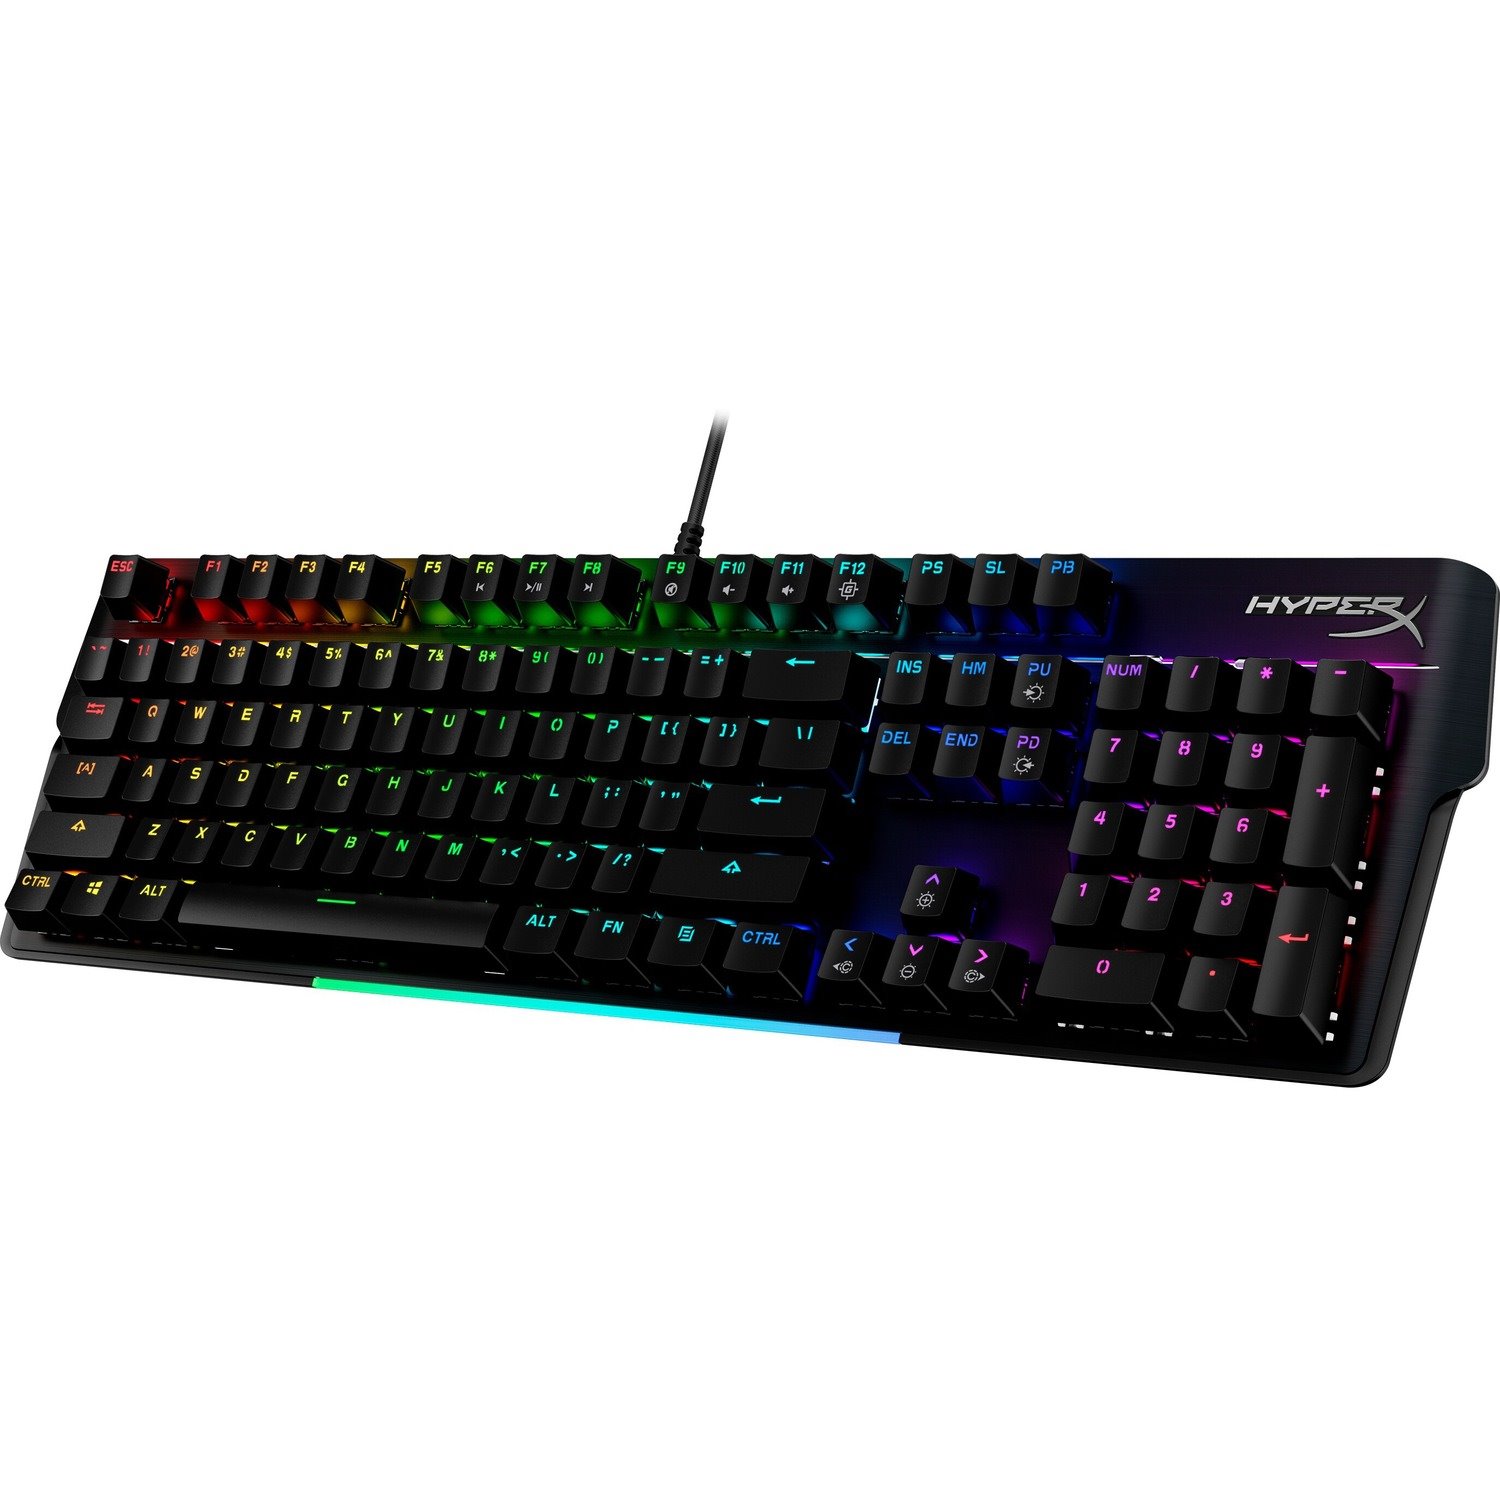 HP HyperX Alloy MKW100 Gaming Keyboard - Cable Connectivity - USB Interface - RGB LED - English (US) - QWERTY Layout - Black